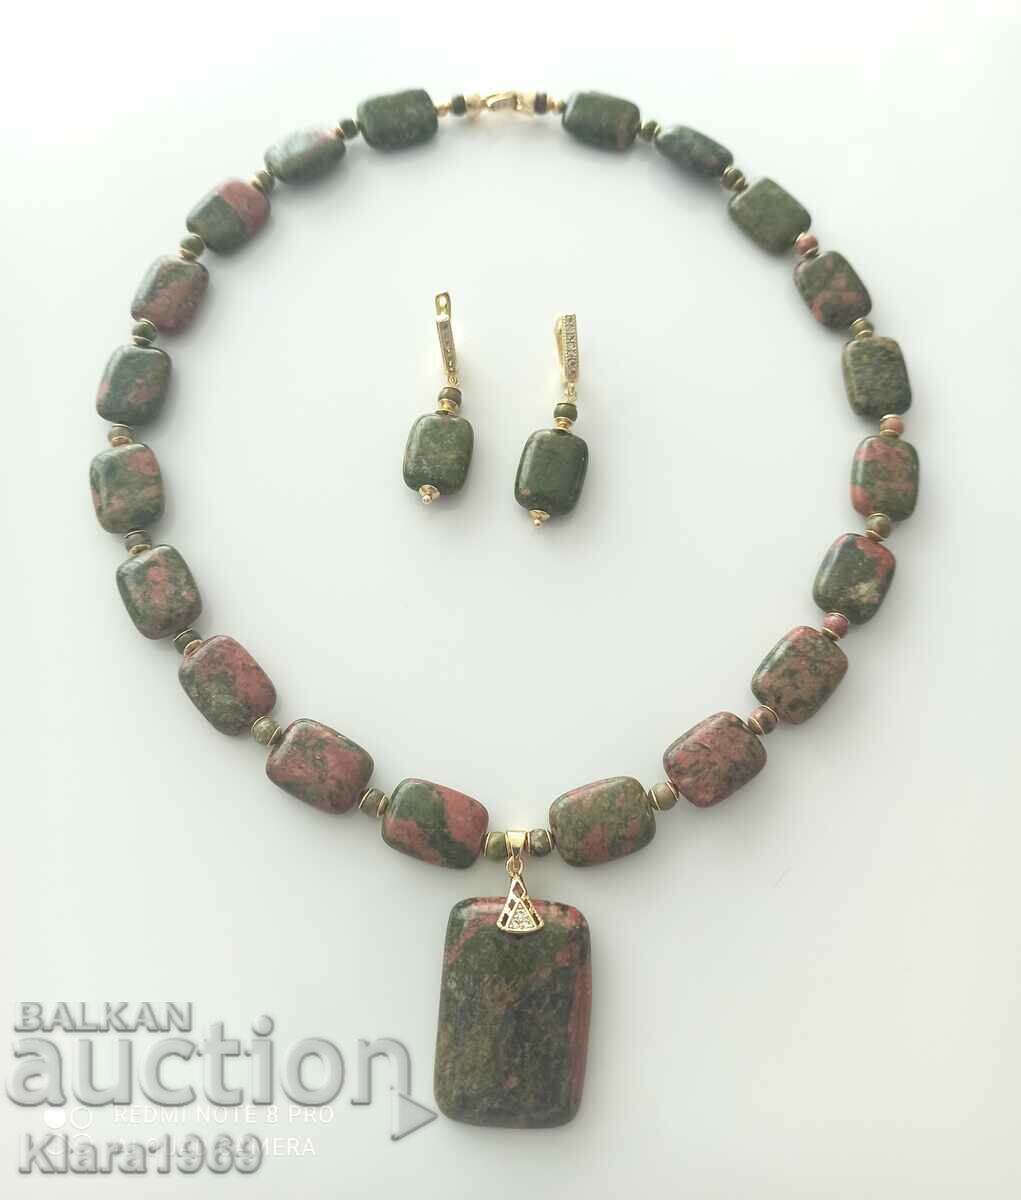 Natural unakita stone necklace and earrings.